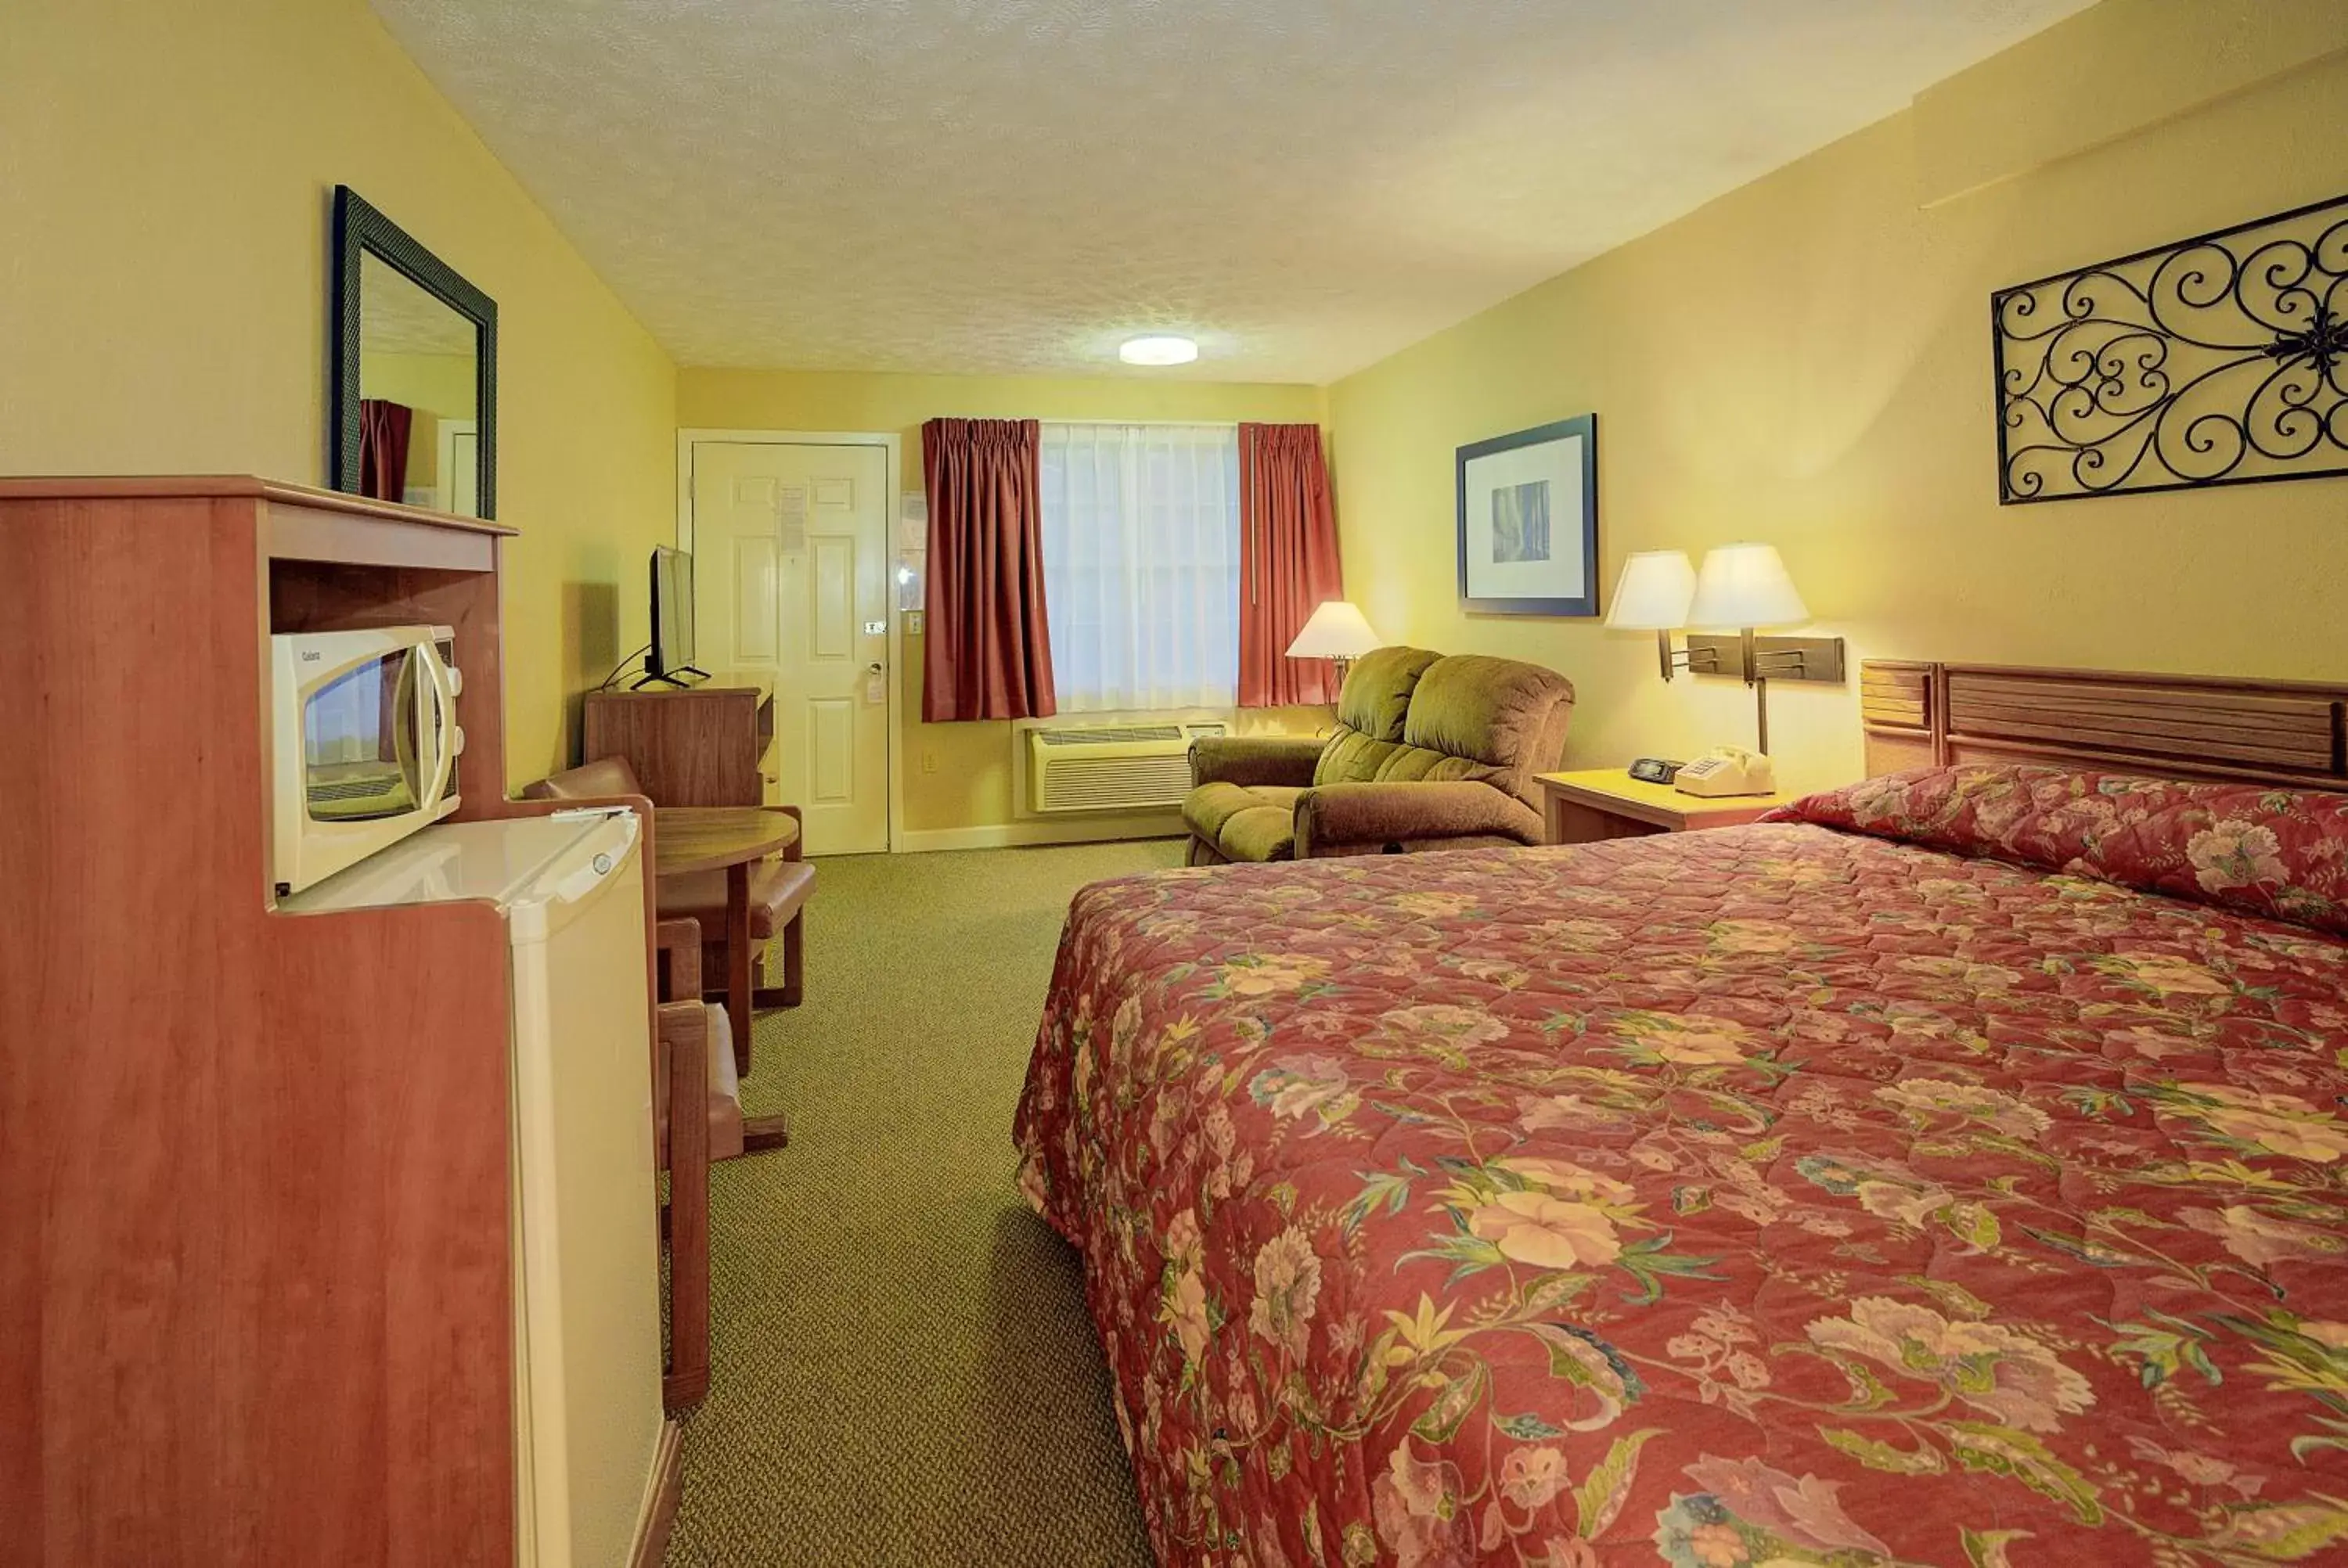 Mountain Aire Inn Sevierville - Pigeon Forge